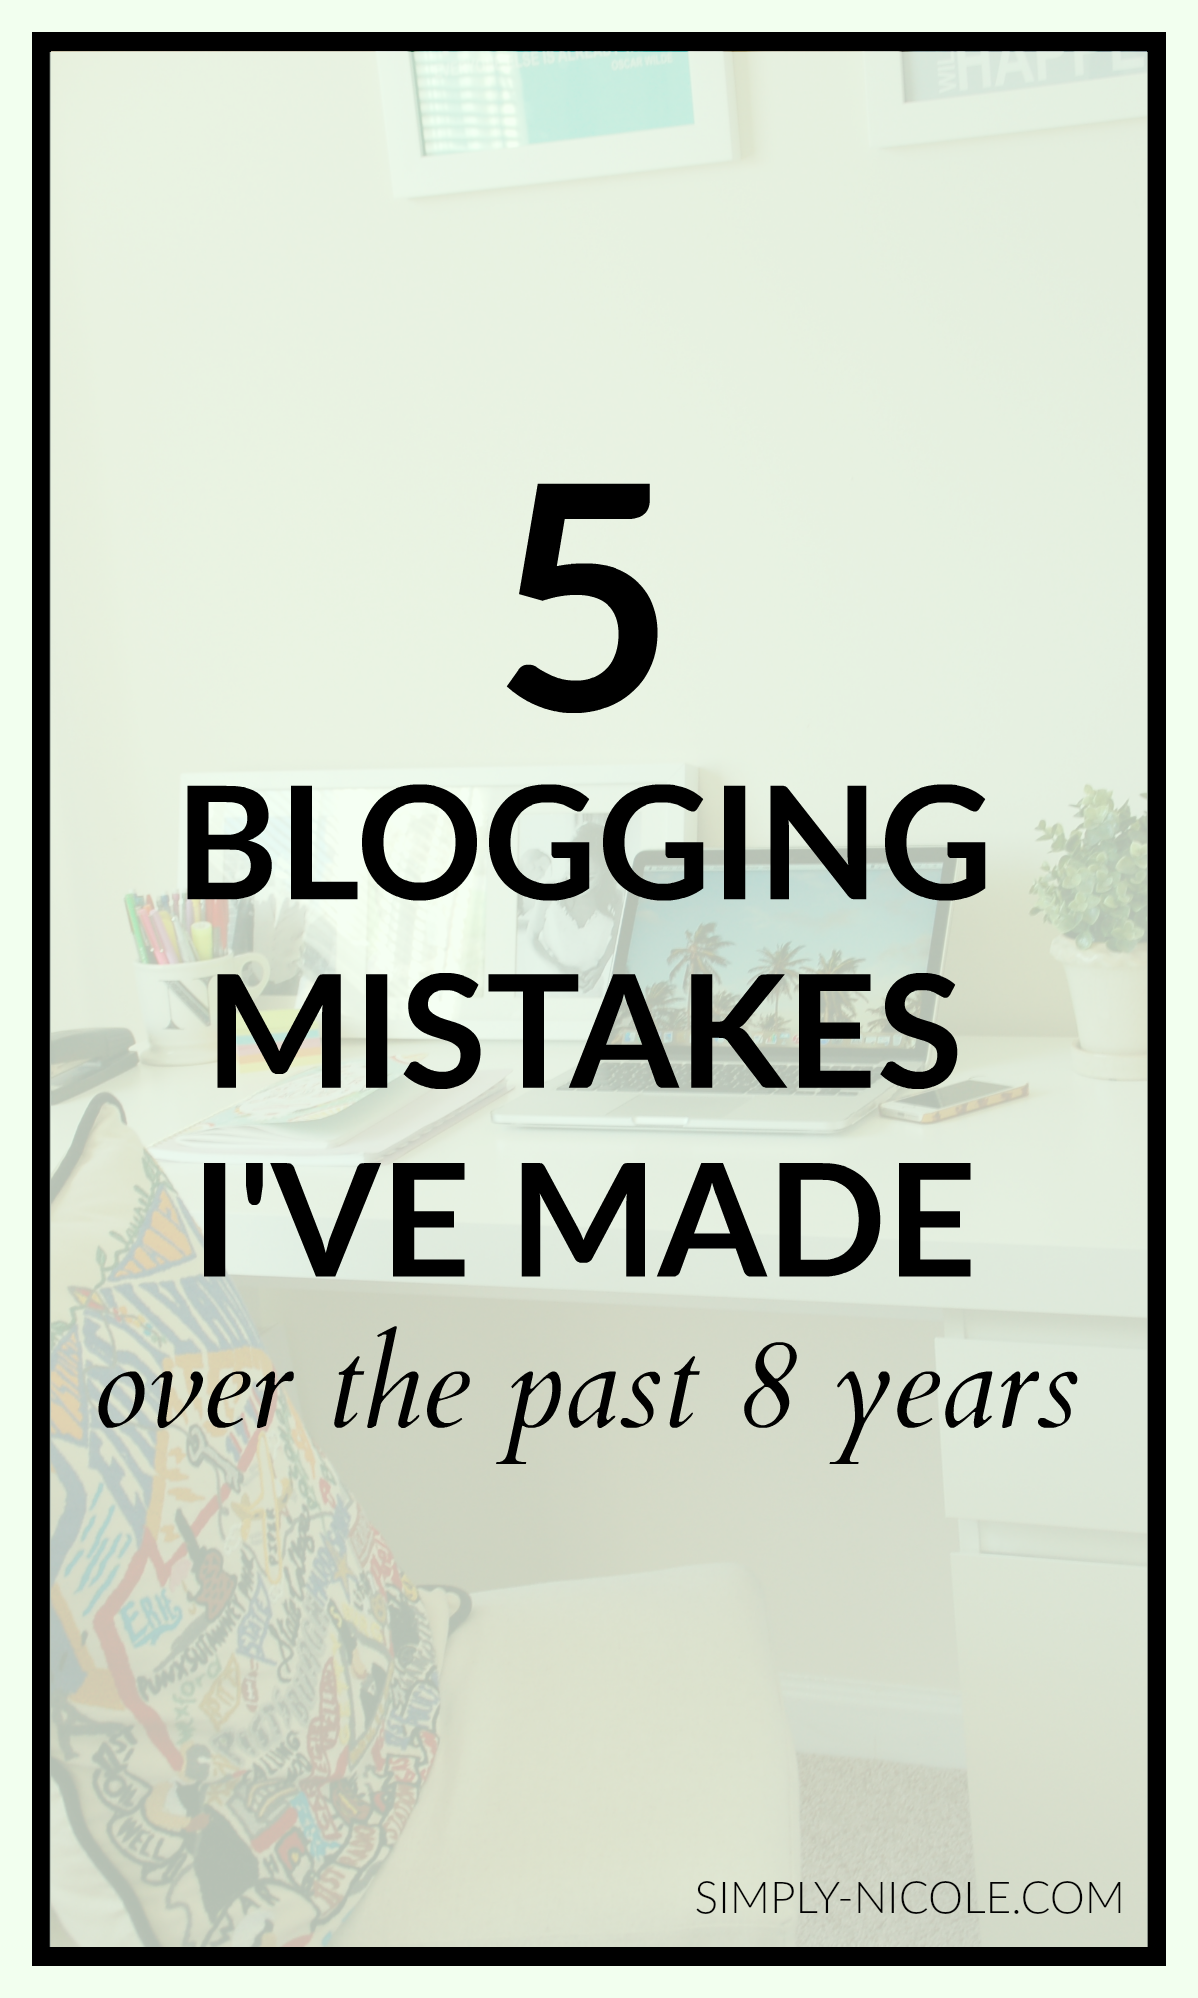 Blogging Mistakes I've Made over the Past 8 Years